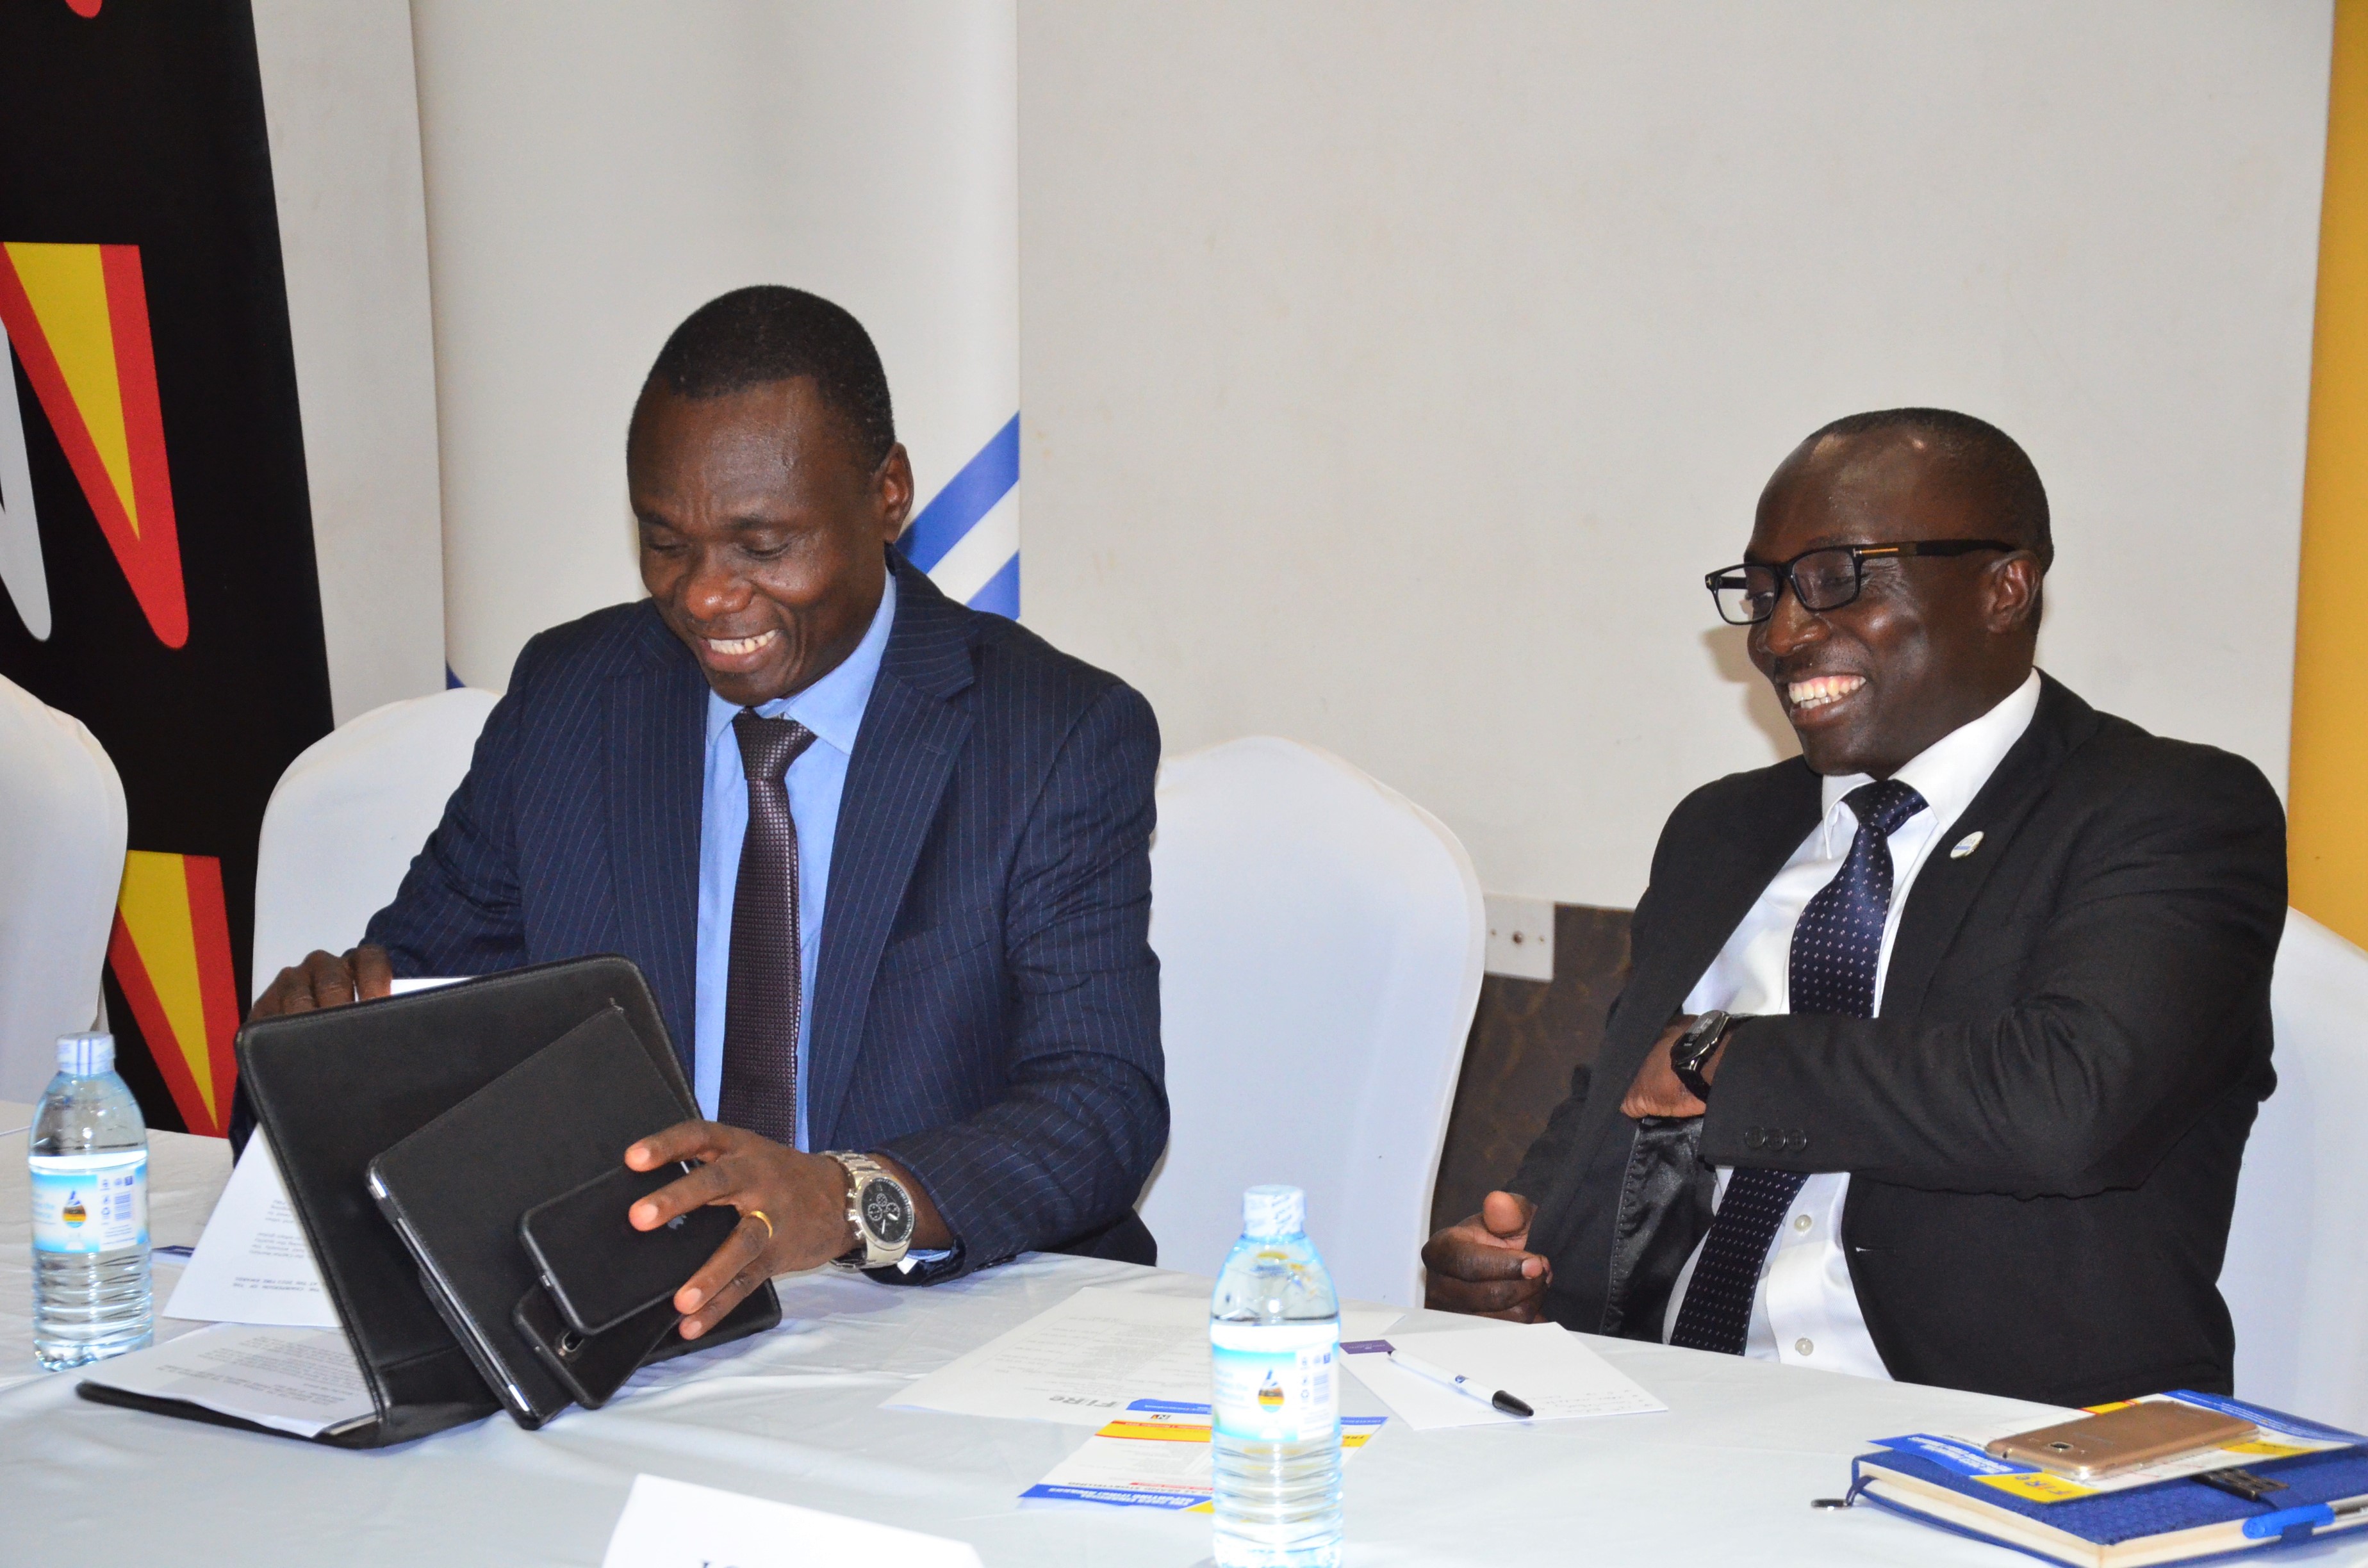 CPA Stephen Ineget, the chairman of the FiRe awards committee and CPA Charles Lutimba, Head of Standards at ICPAU share a light moments at the event